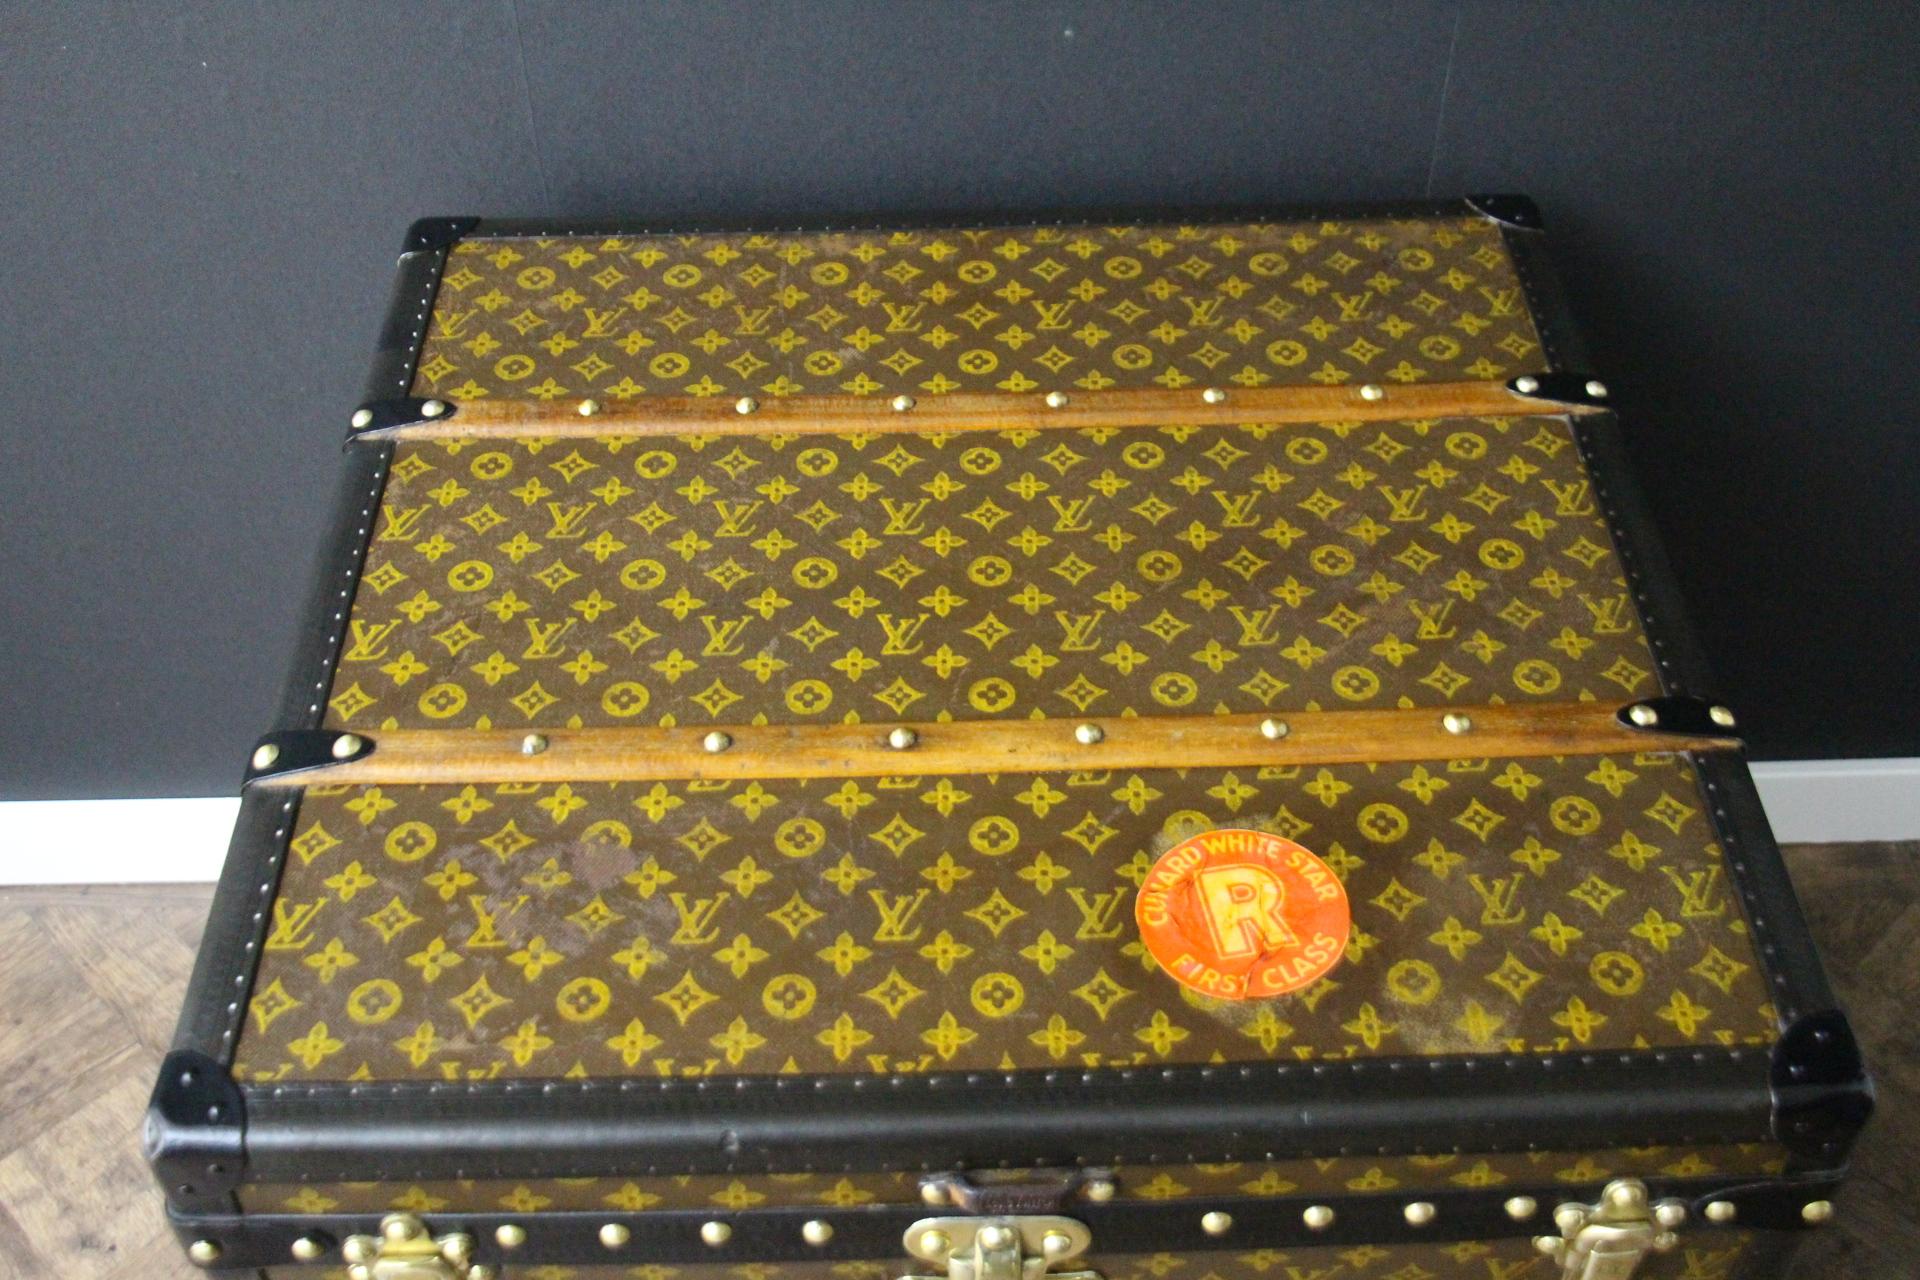 This beautiful and very rare Louis Vuitton trunk features hand painted stenciled monogram canvas, black color lozine trim, black steel side handles, stamped Louis Vuitton brass studs, lock and clasps. It also features hand painted yellow and and